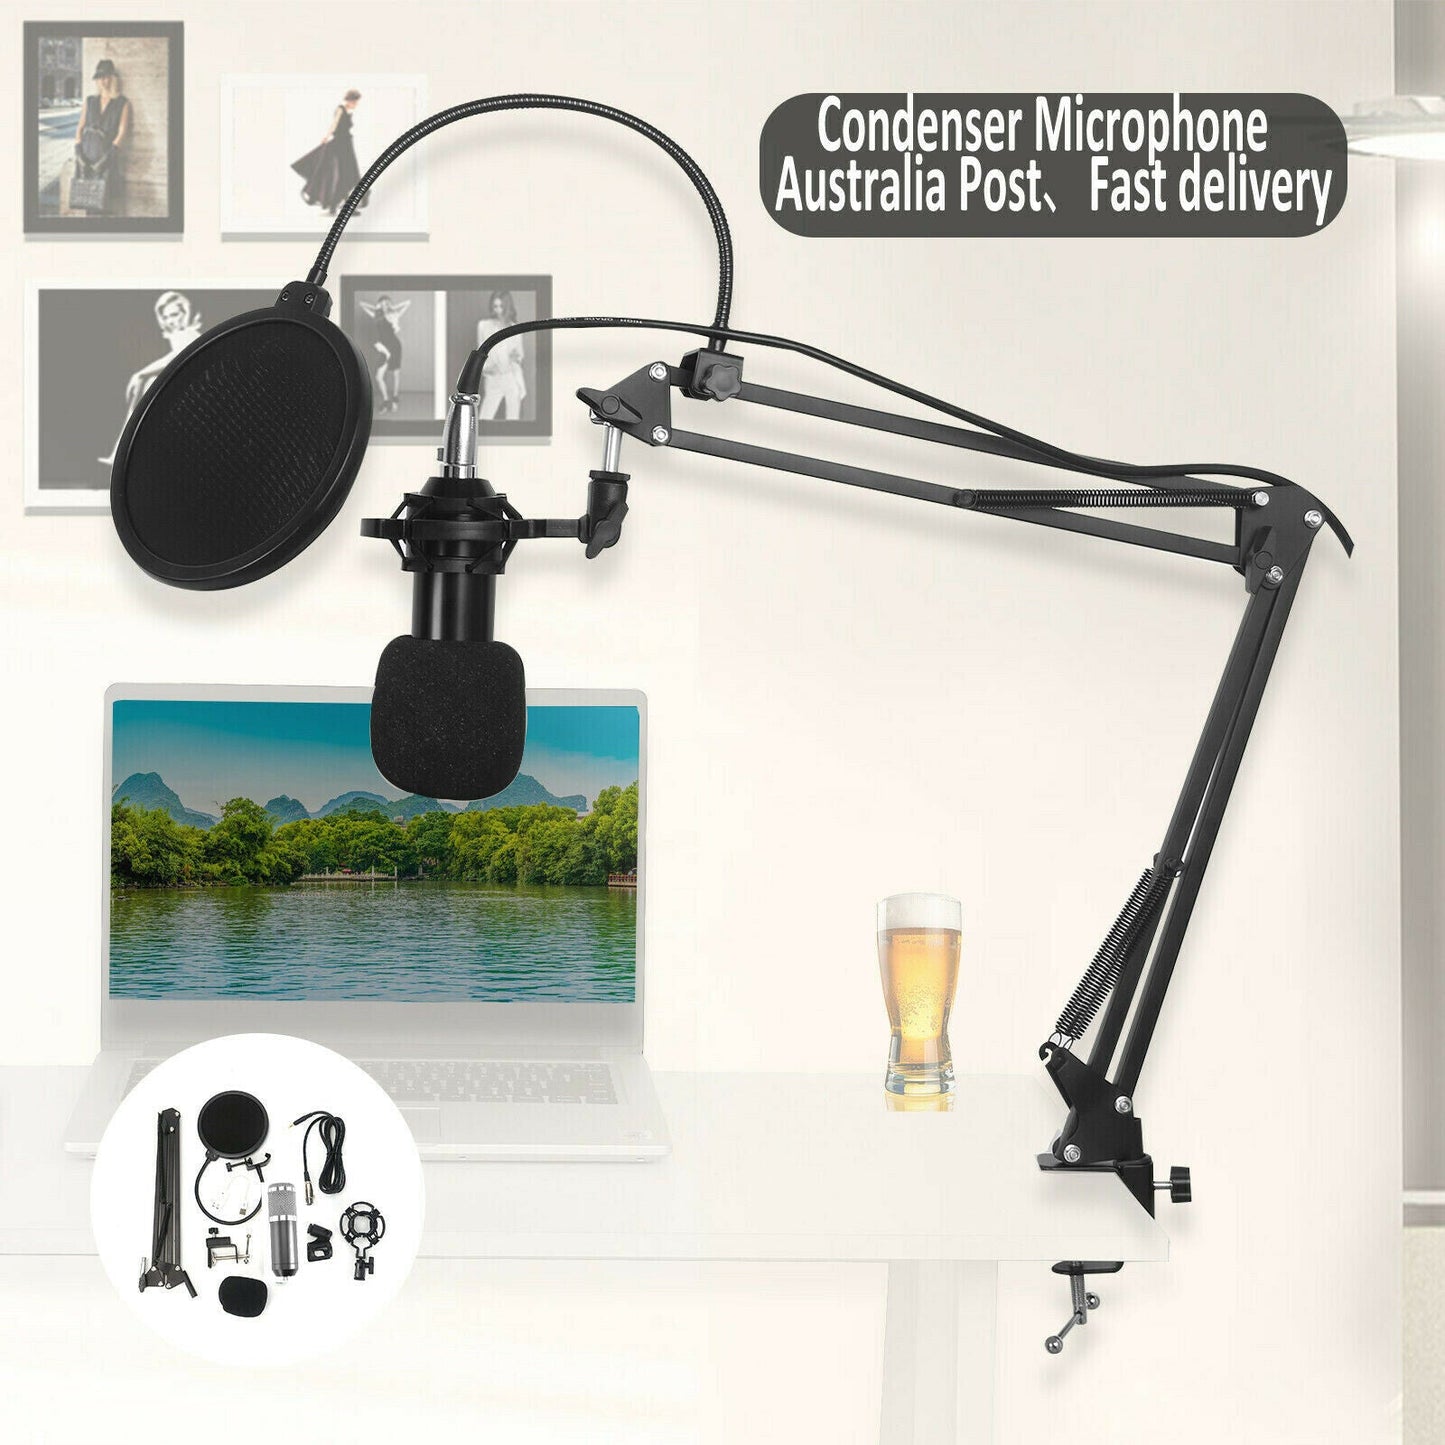 Professional Condenser Microphone Kit with stand